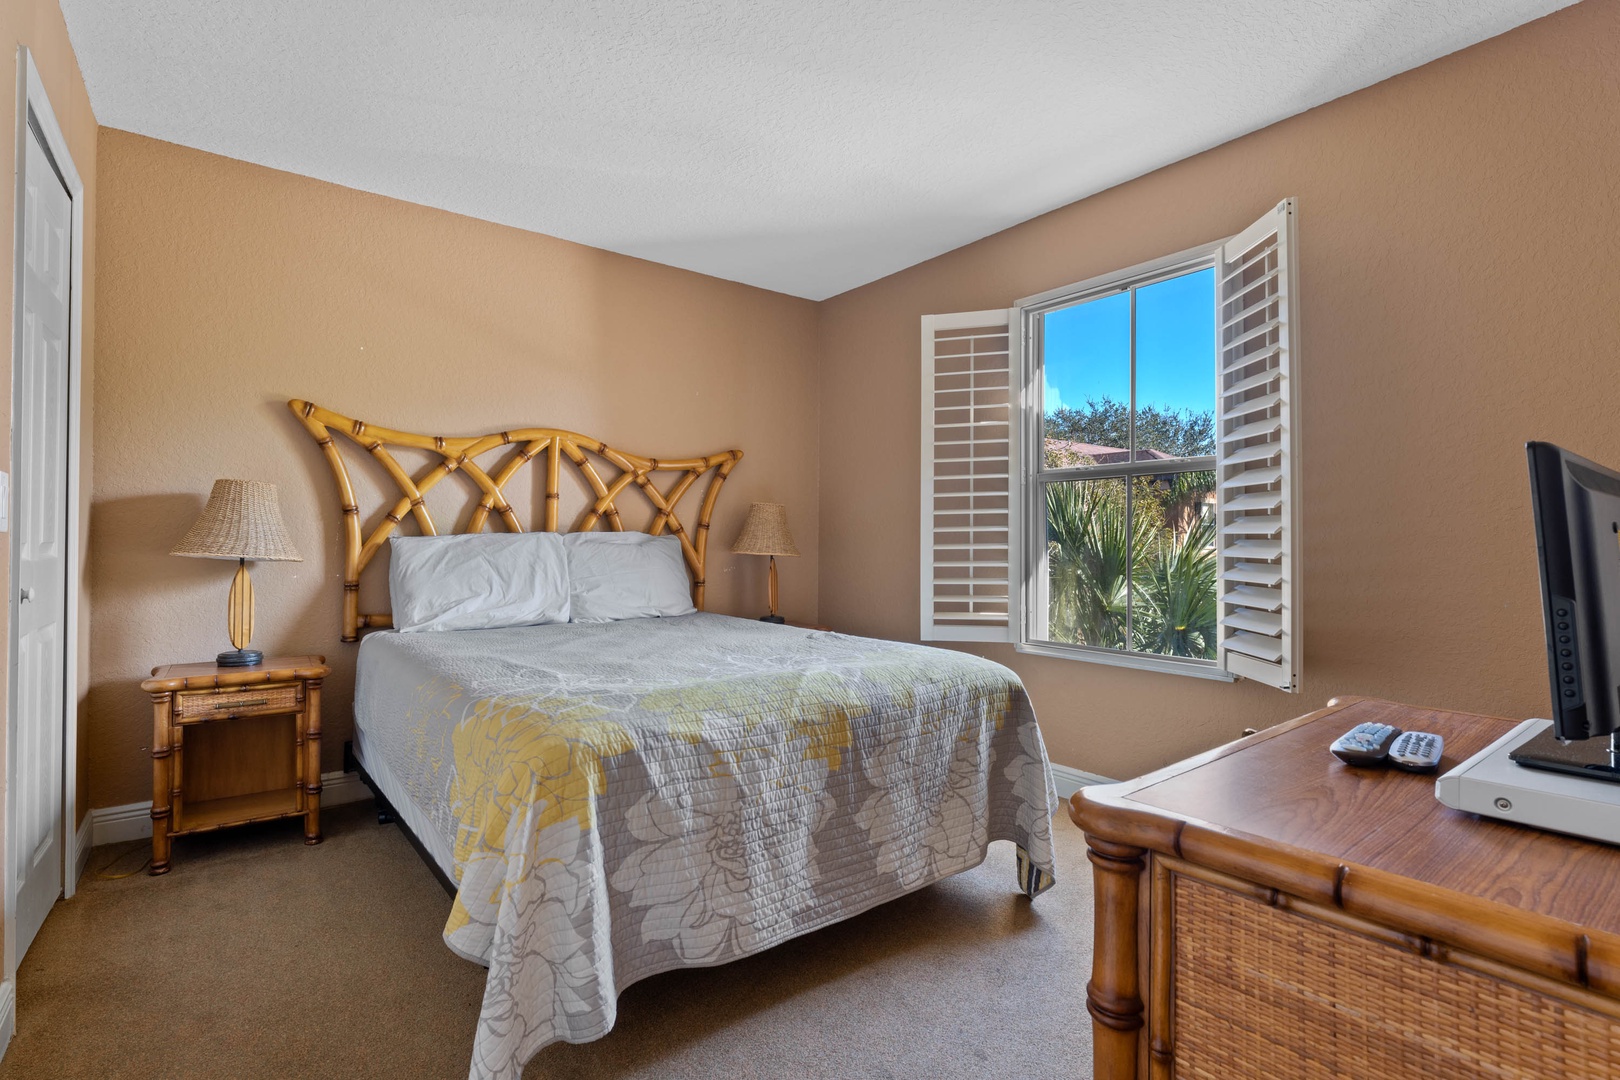 This 2nd floor queen bedroom includes a TV & tranquil views